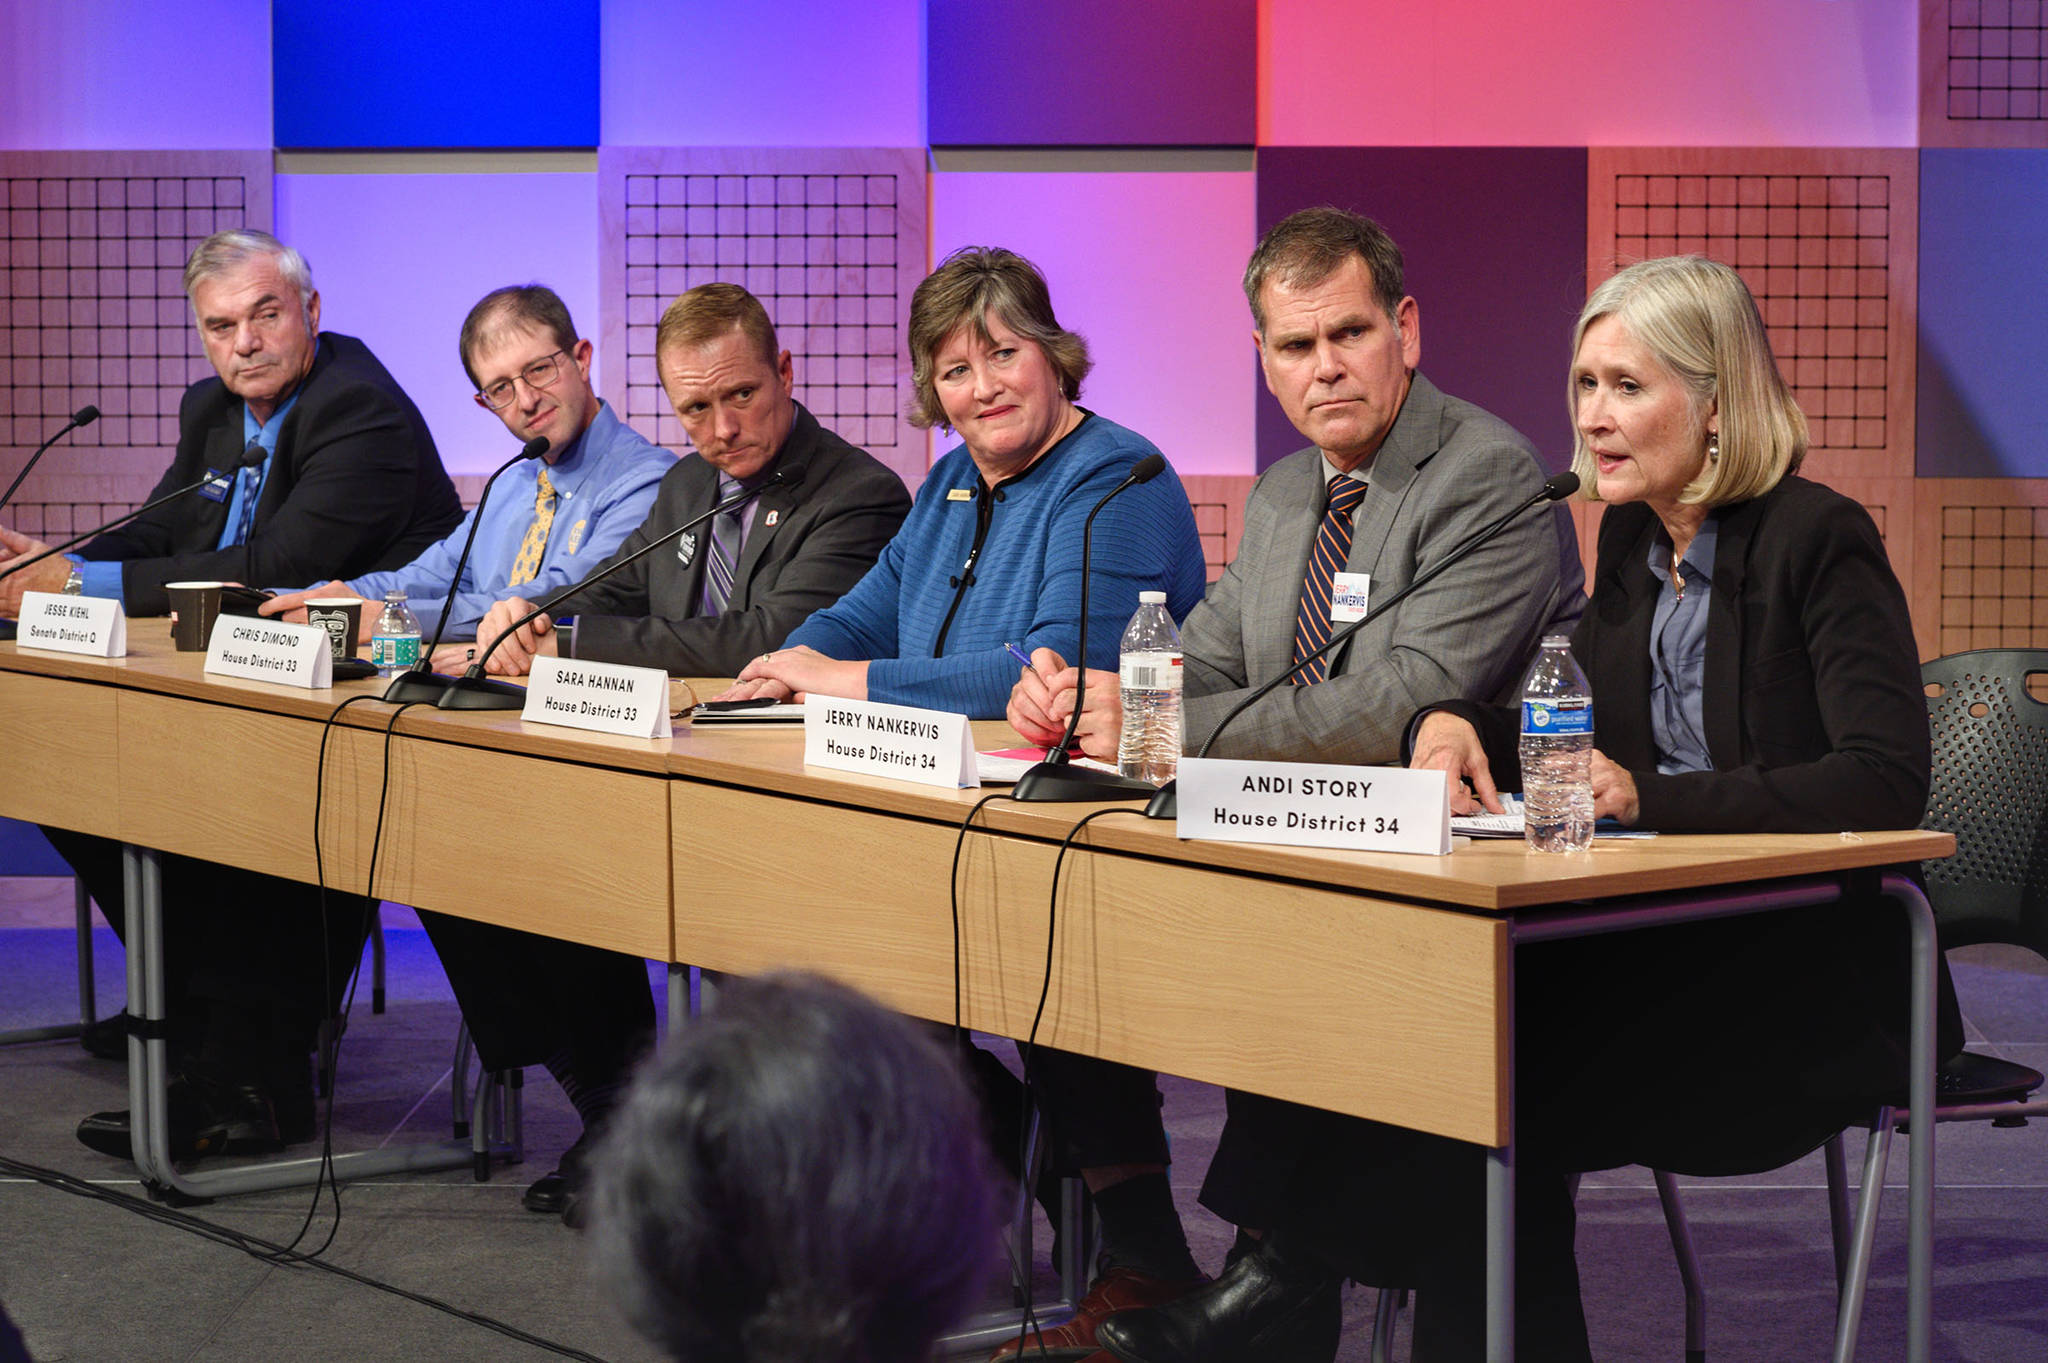 Legislative candidates answer questions during a forum sponsored by the Juneau Empire, along with the League of Women Voters of Juneau, Juneau Votes! and KTOO at KTOO on Tuesday, Oct. 9, 2018. From left: Senate District Q candidates Don Etheridge and Jesse Kiehl, House District 33 candidates Chris Dimond and Sara Hannan and House District 34 candidates Jerry Nankervis and Andi Story. (Michael Penn | Juneau Empire)